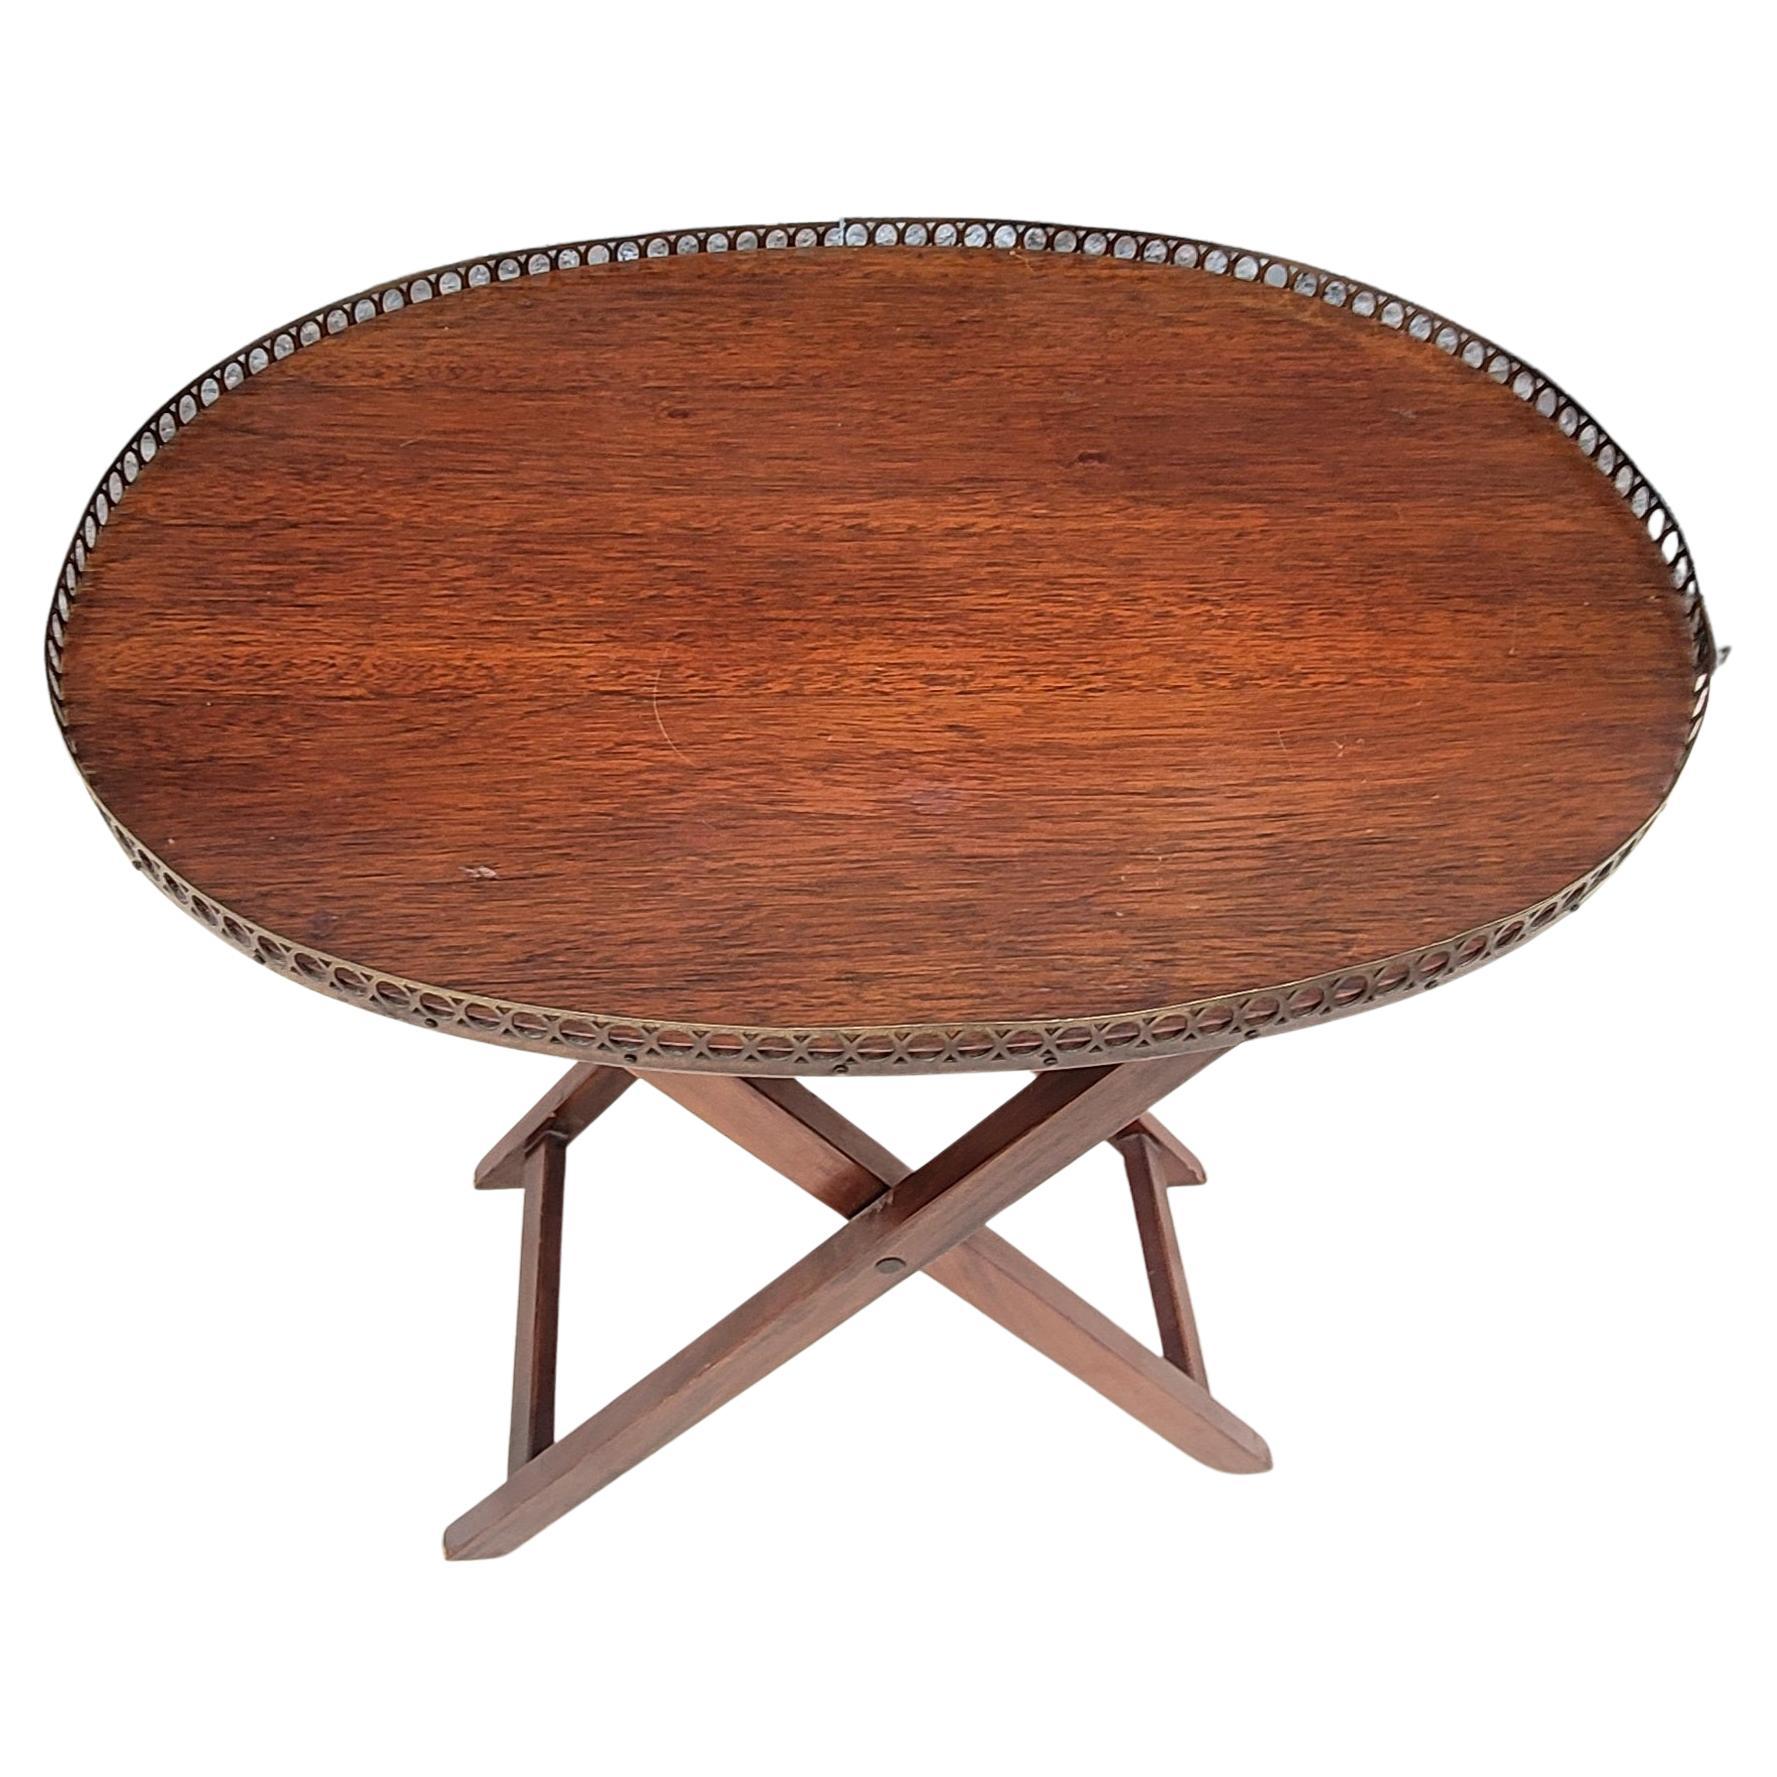 A mid century George III style mahogany folding serving tray with metal gallery.